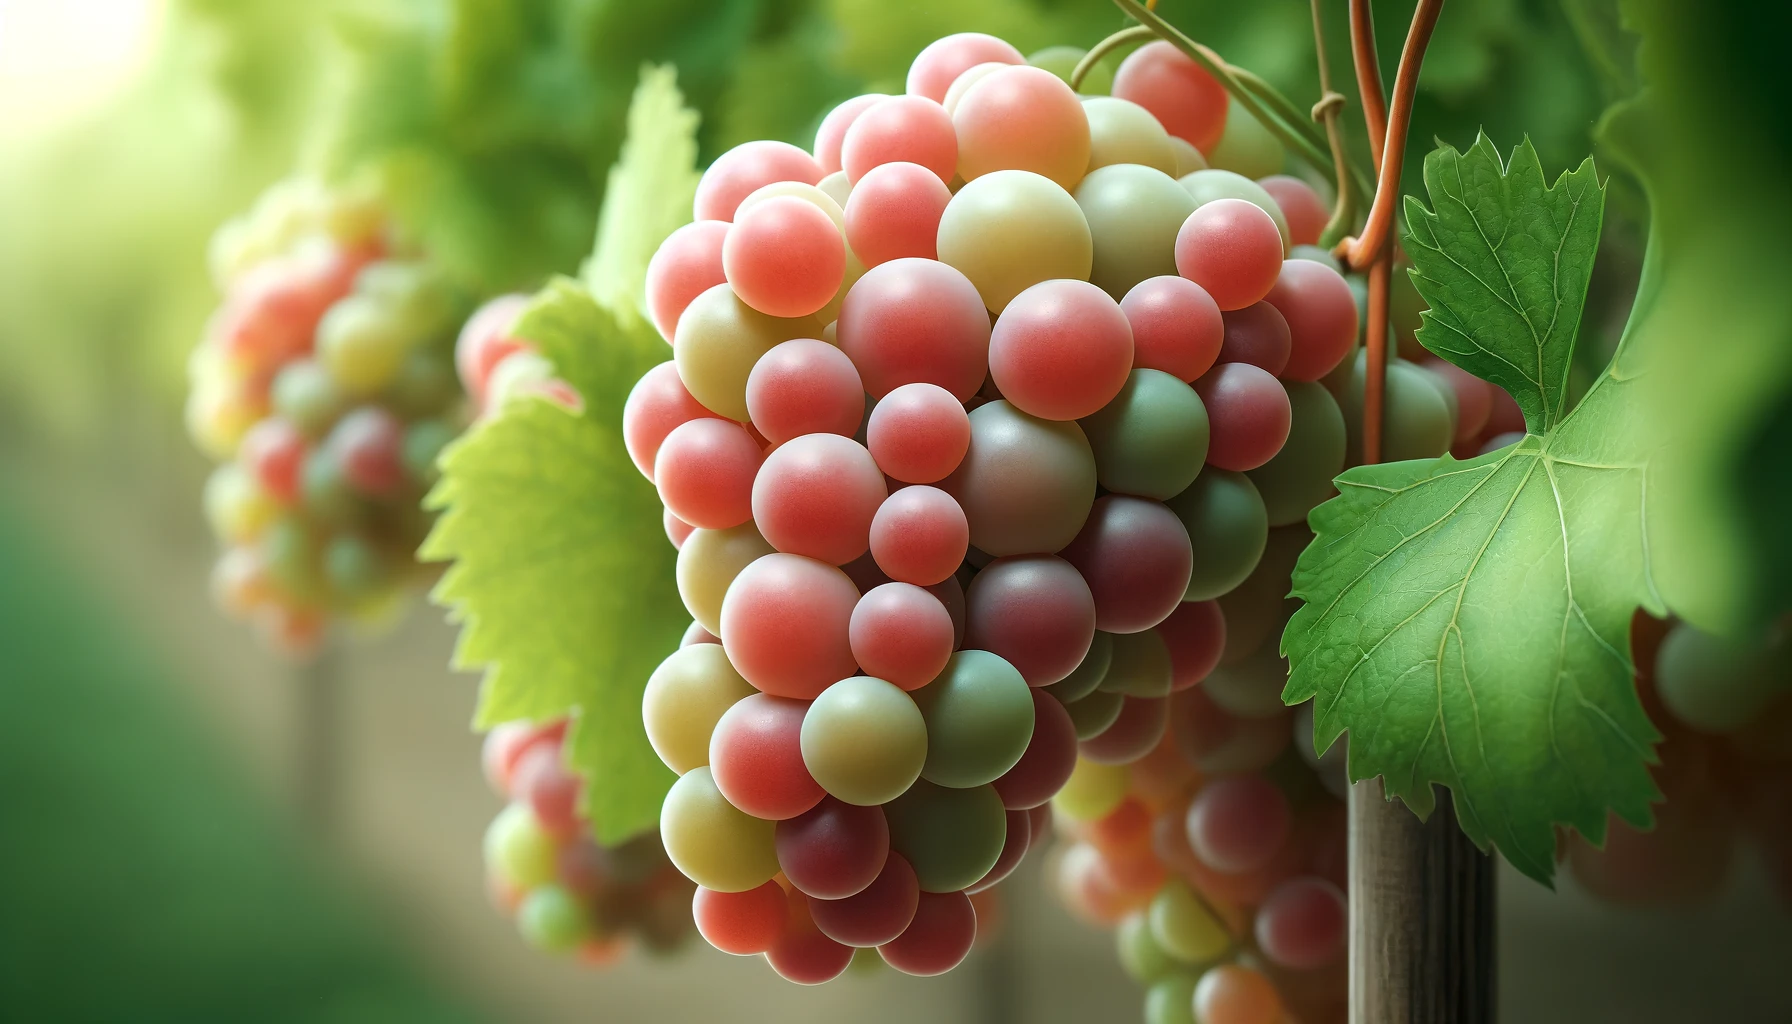 DALL·E 2024-05-23 11.05.37 - Close-up, photorealistic stock image of Grenache grapes, focusing on a cluster of ripe Grenache grapes with light red to pinkish skins, attached to th